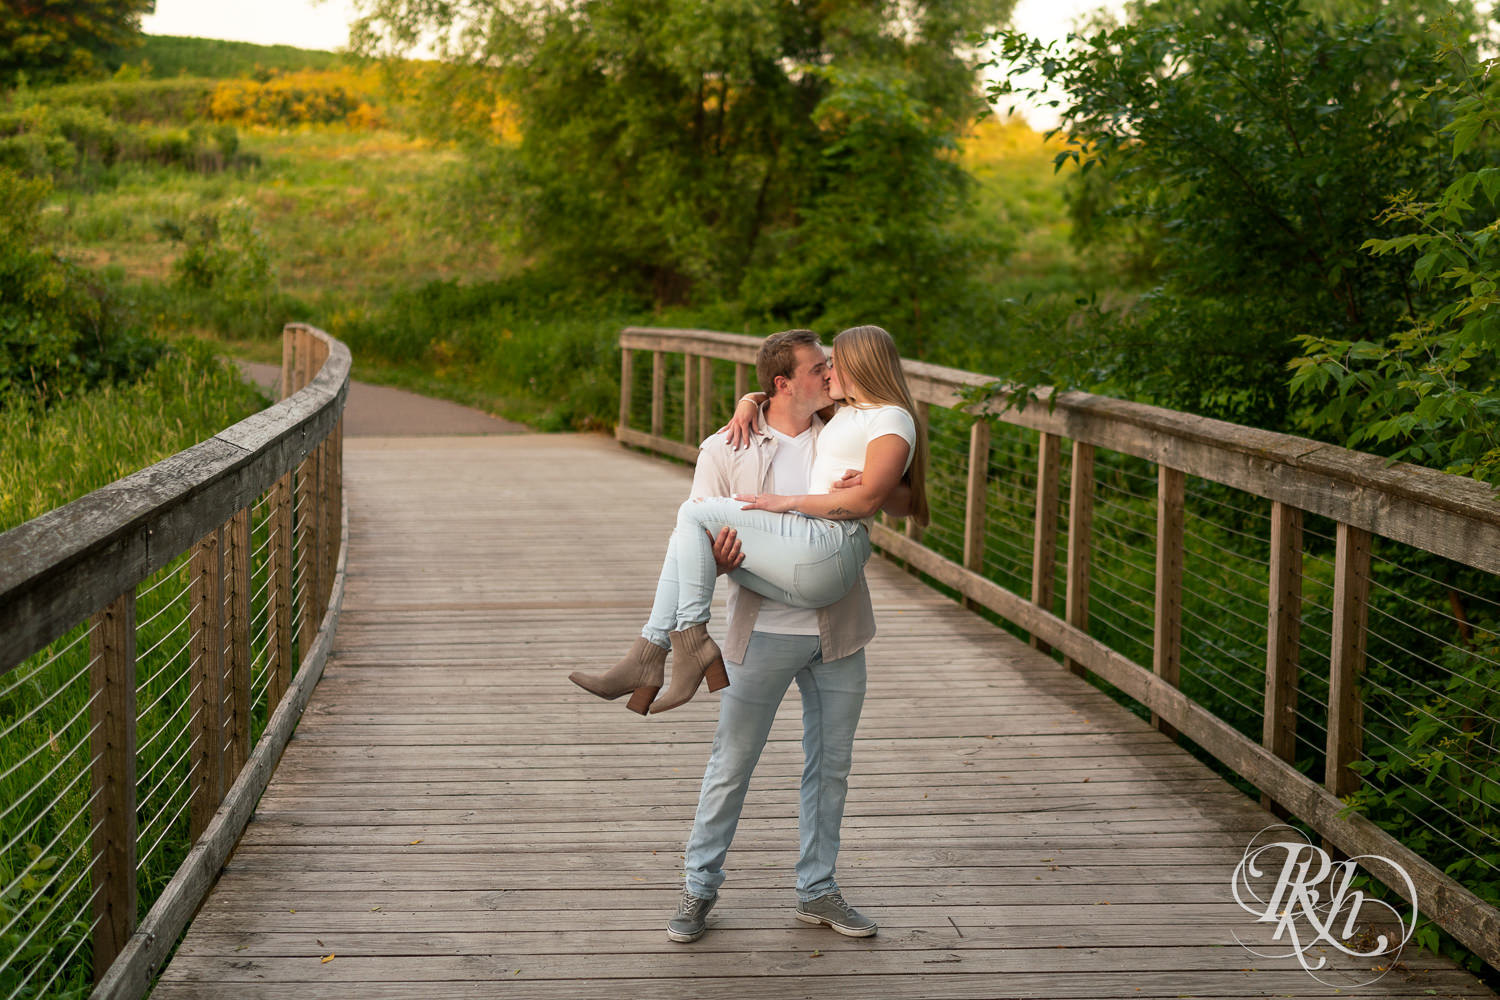 Man and woman in jeans kiss on bridge during golden hour engagement photography in Eagan, Minnesota.